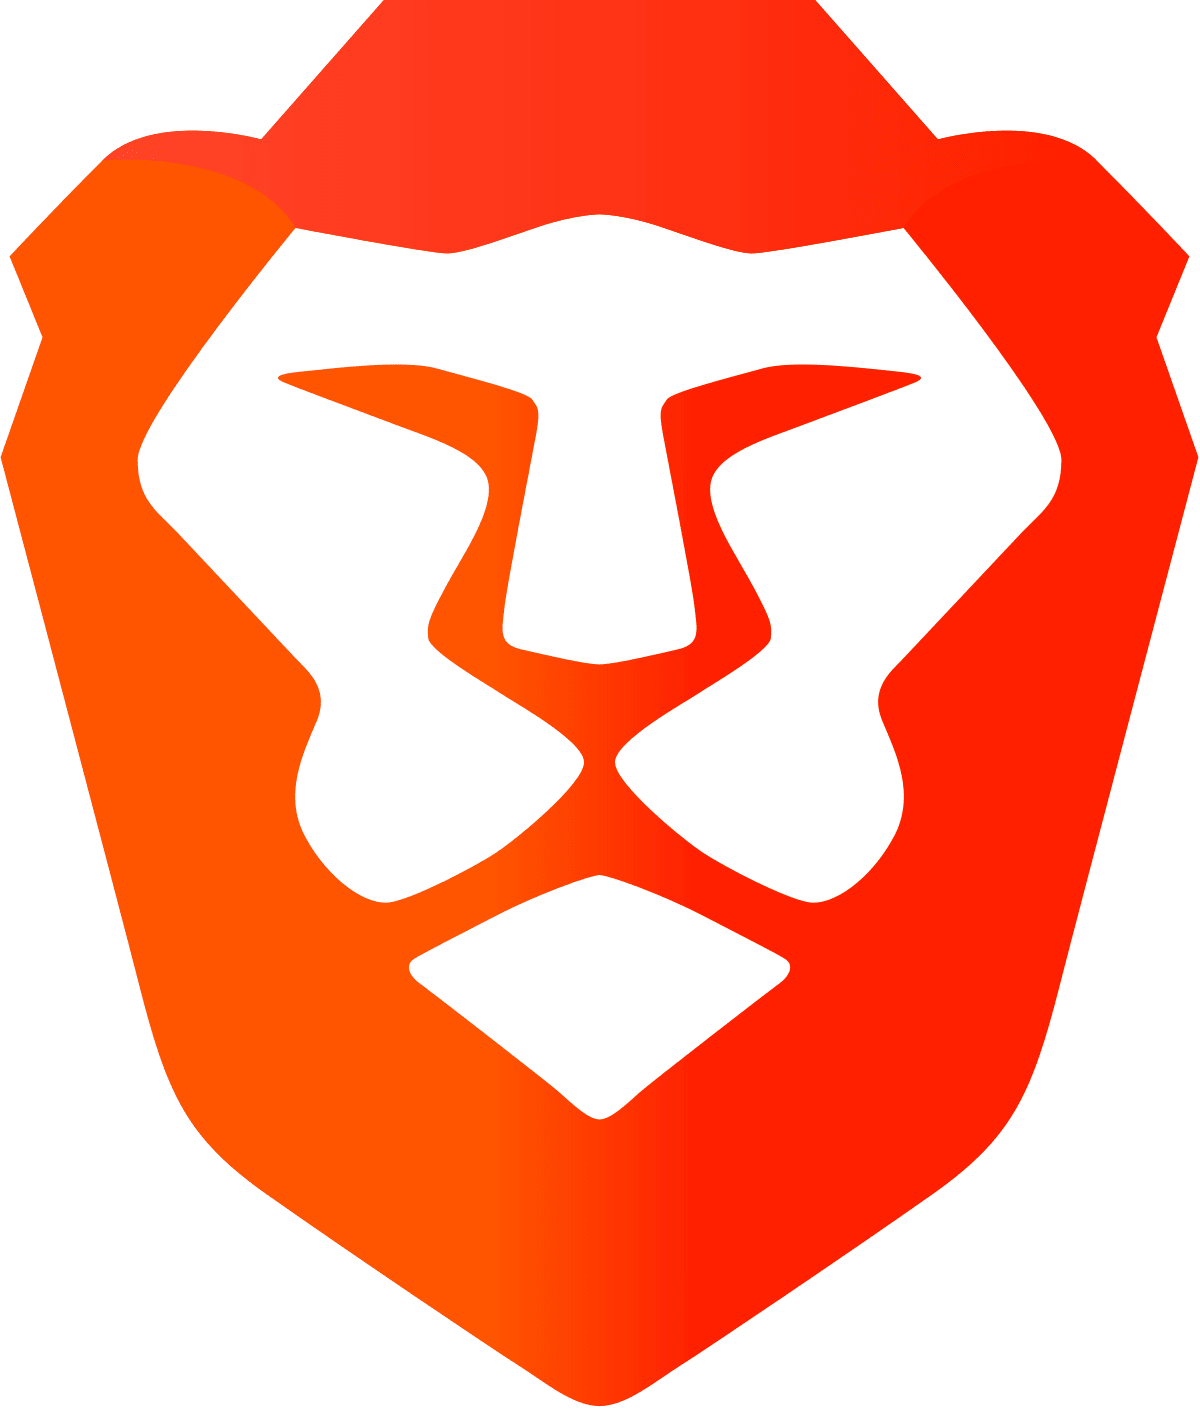 Brave Browser for iPad